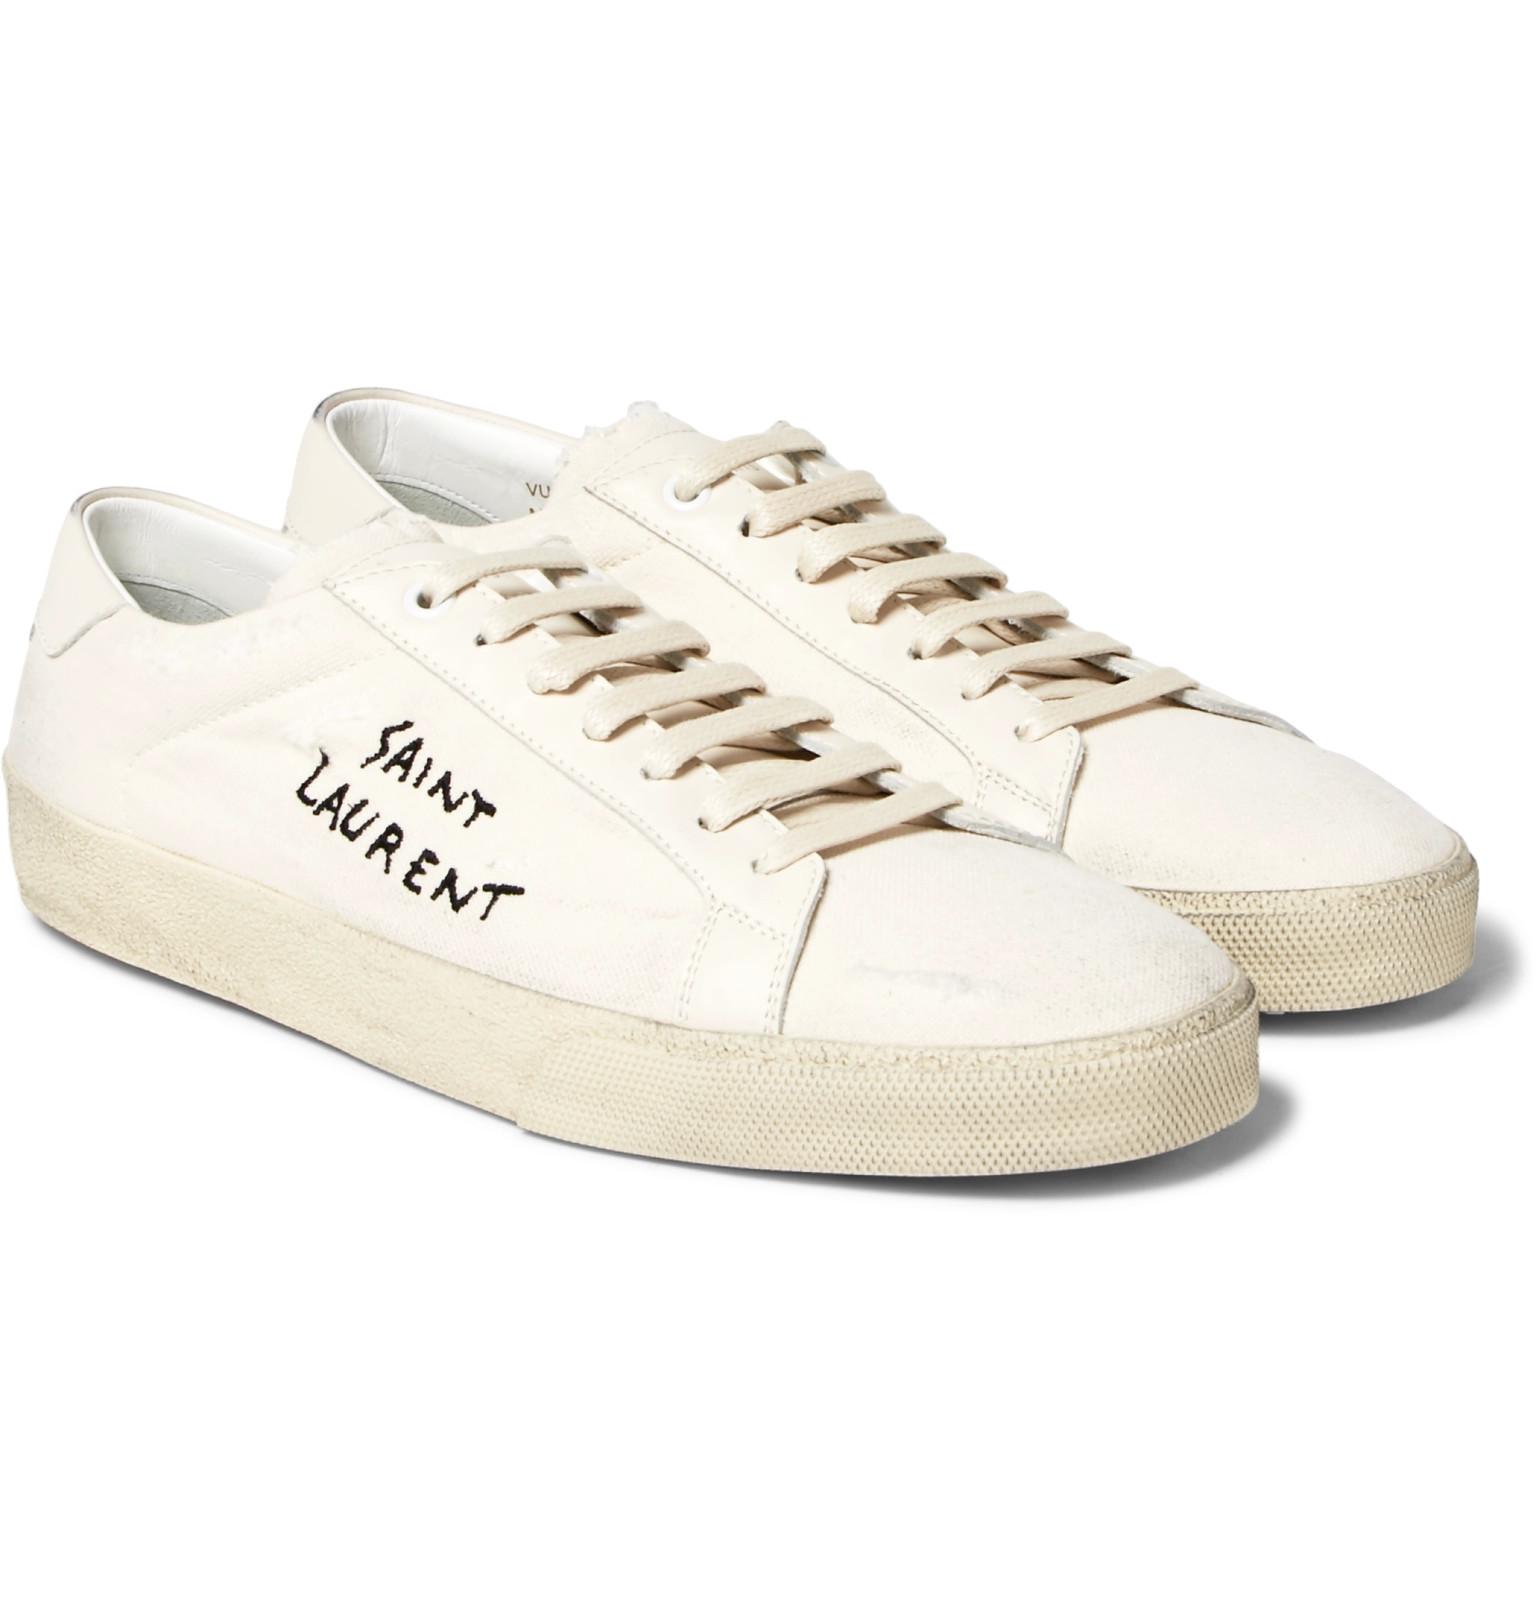 Ysl Distressed Sneakers Outlet, SAVE 52%.